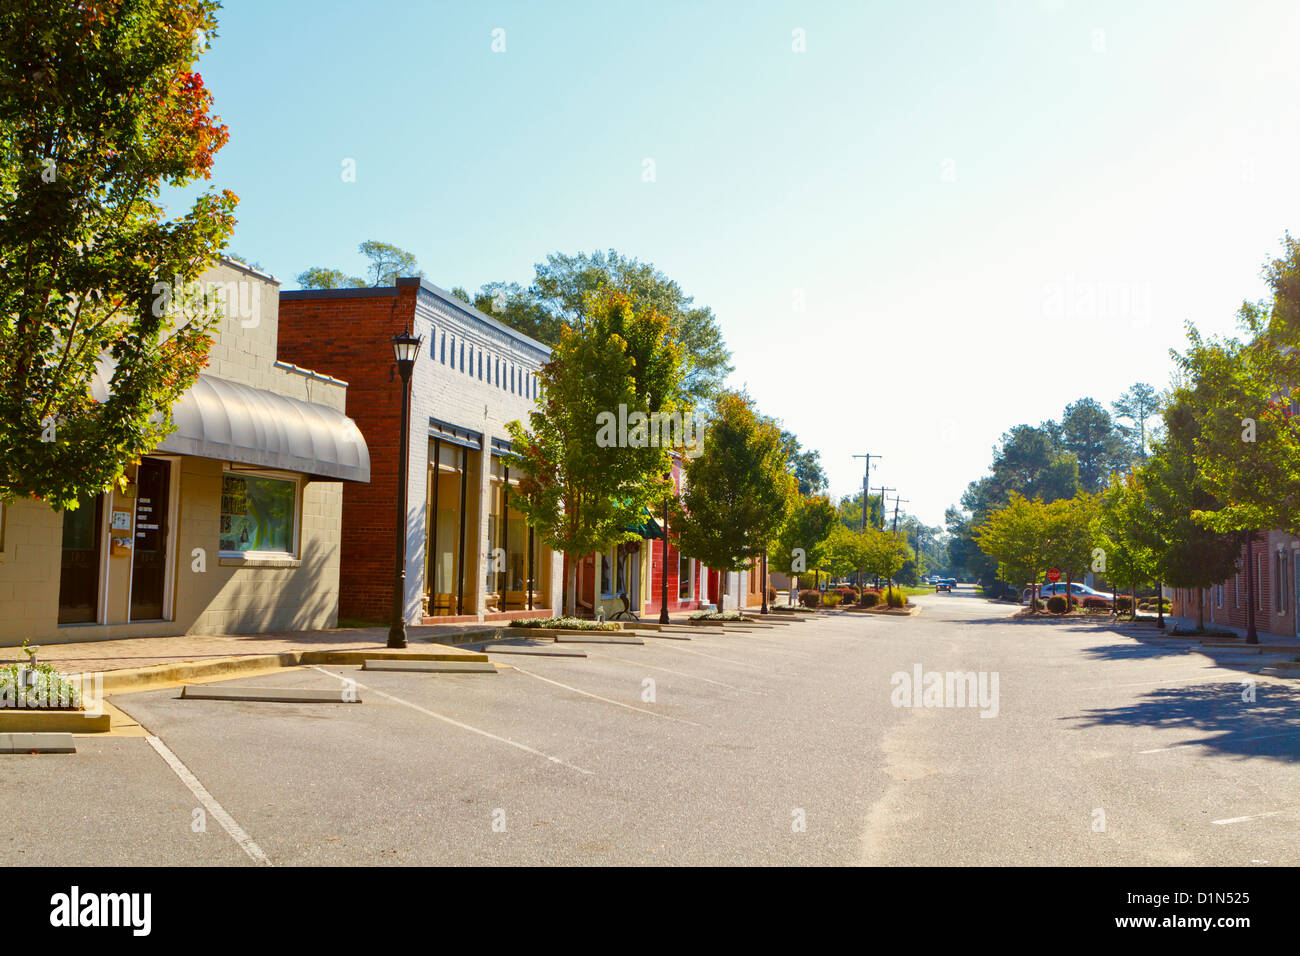 Looking down Beaufort Street in Chapin, SC on a clear Summer day. Stock Photo